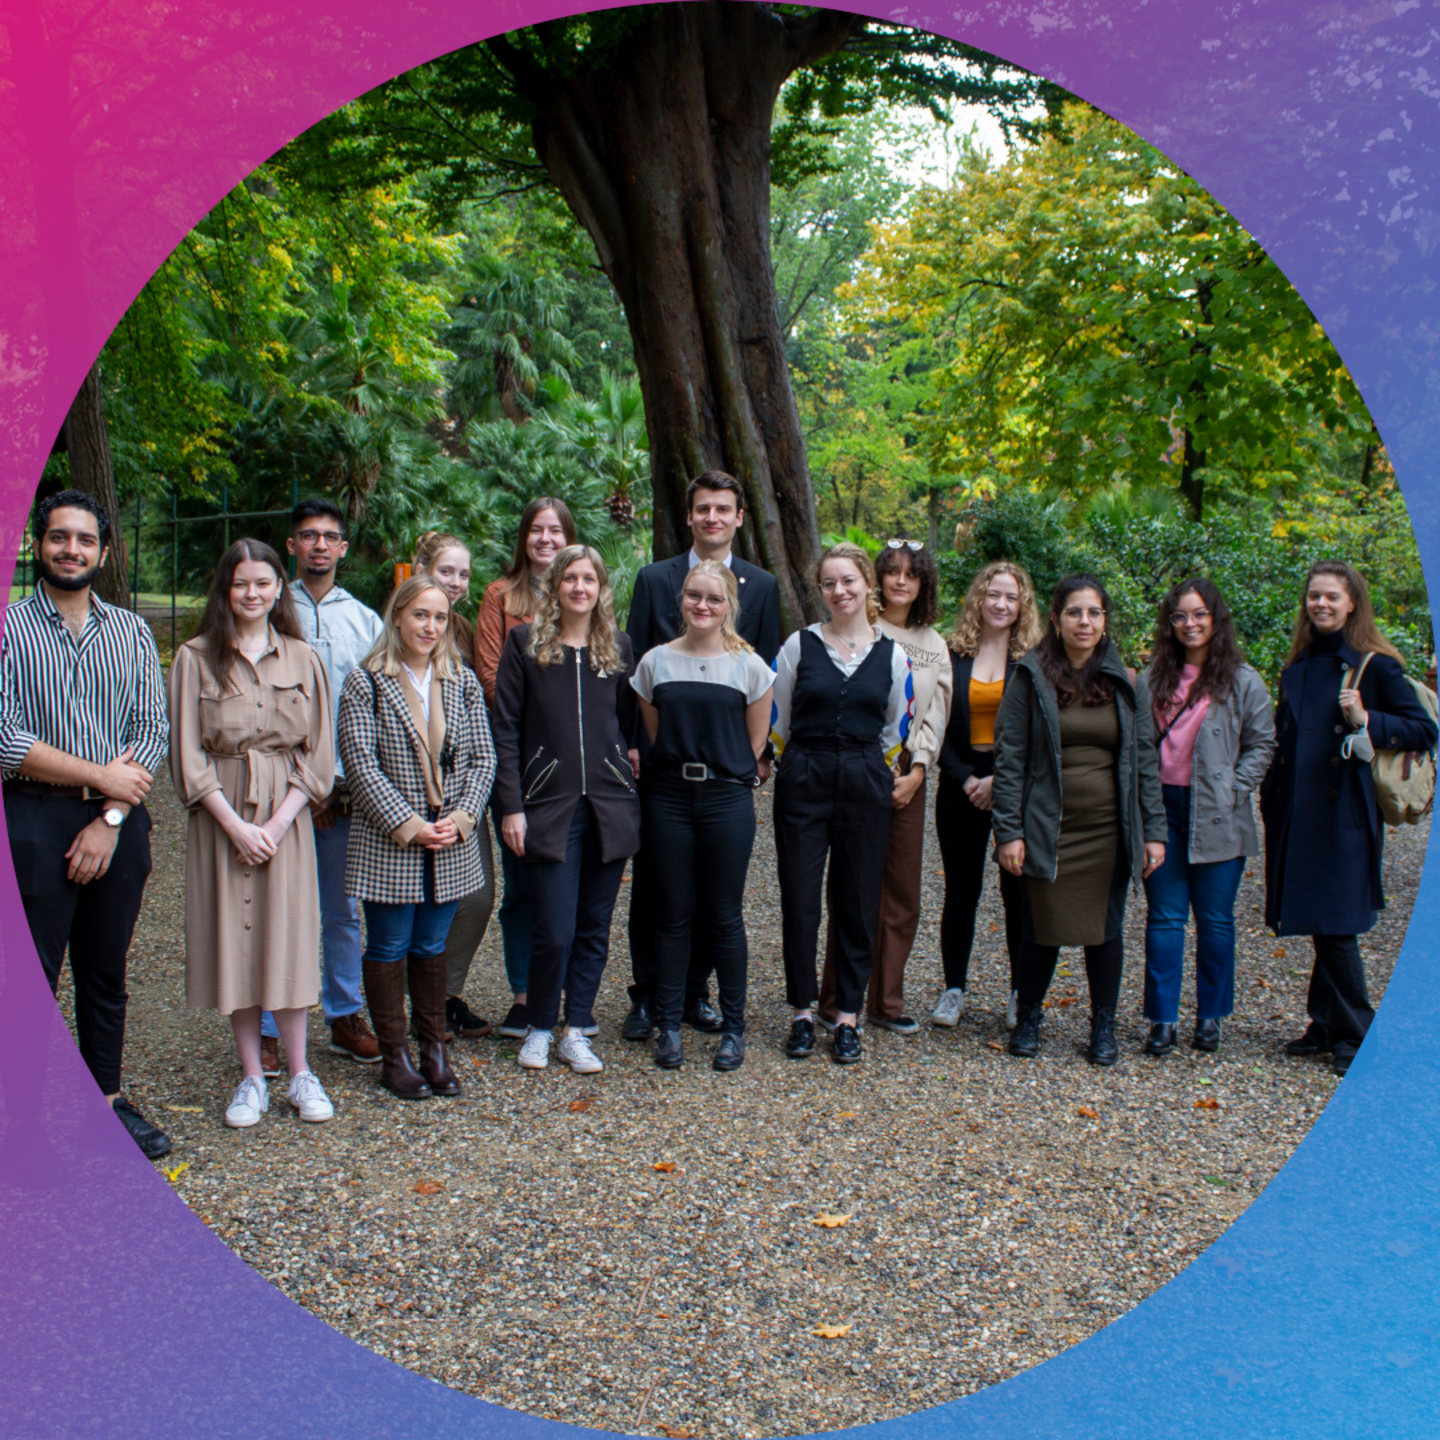 The photo shows a group of students smiling at the camera. In the background are plants. The picture is bordered by a circular frame in a colour gradient from magenta to cyan.